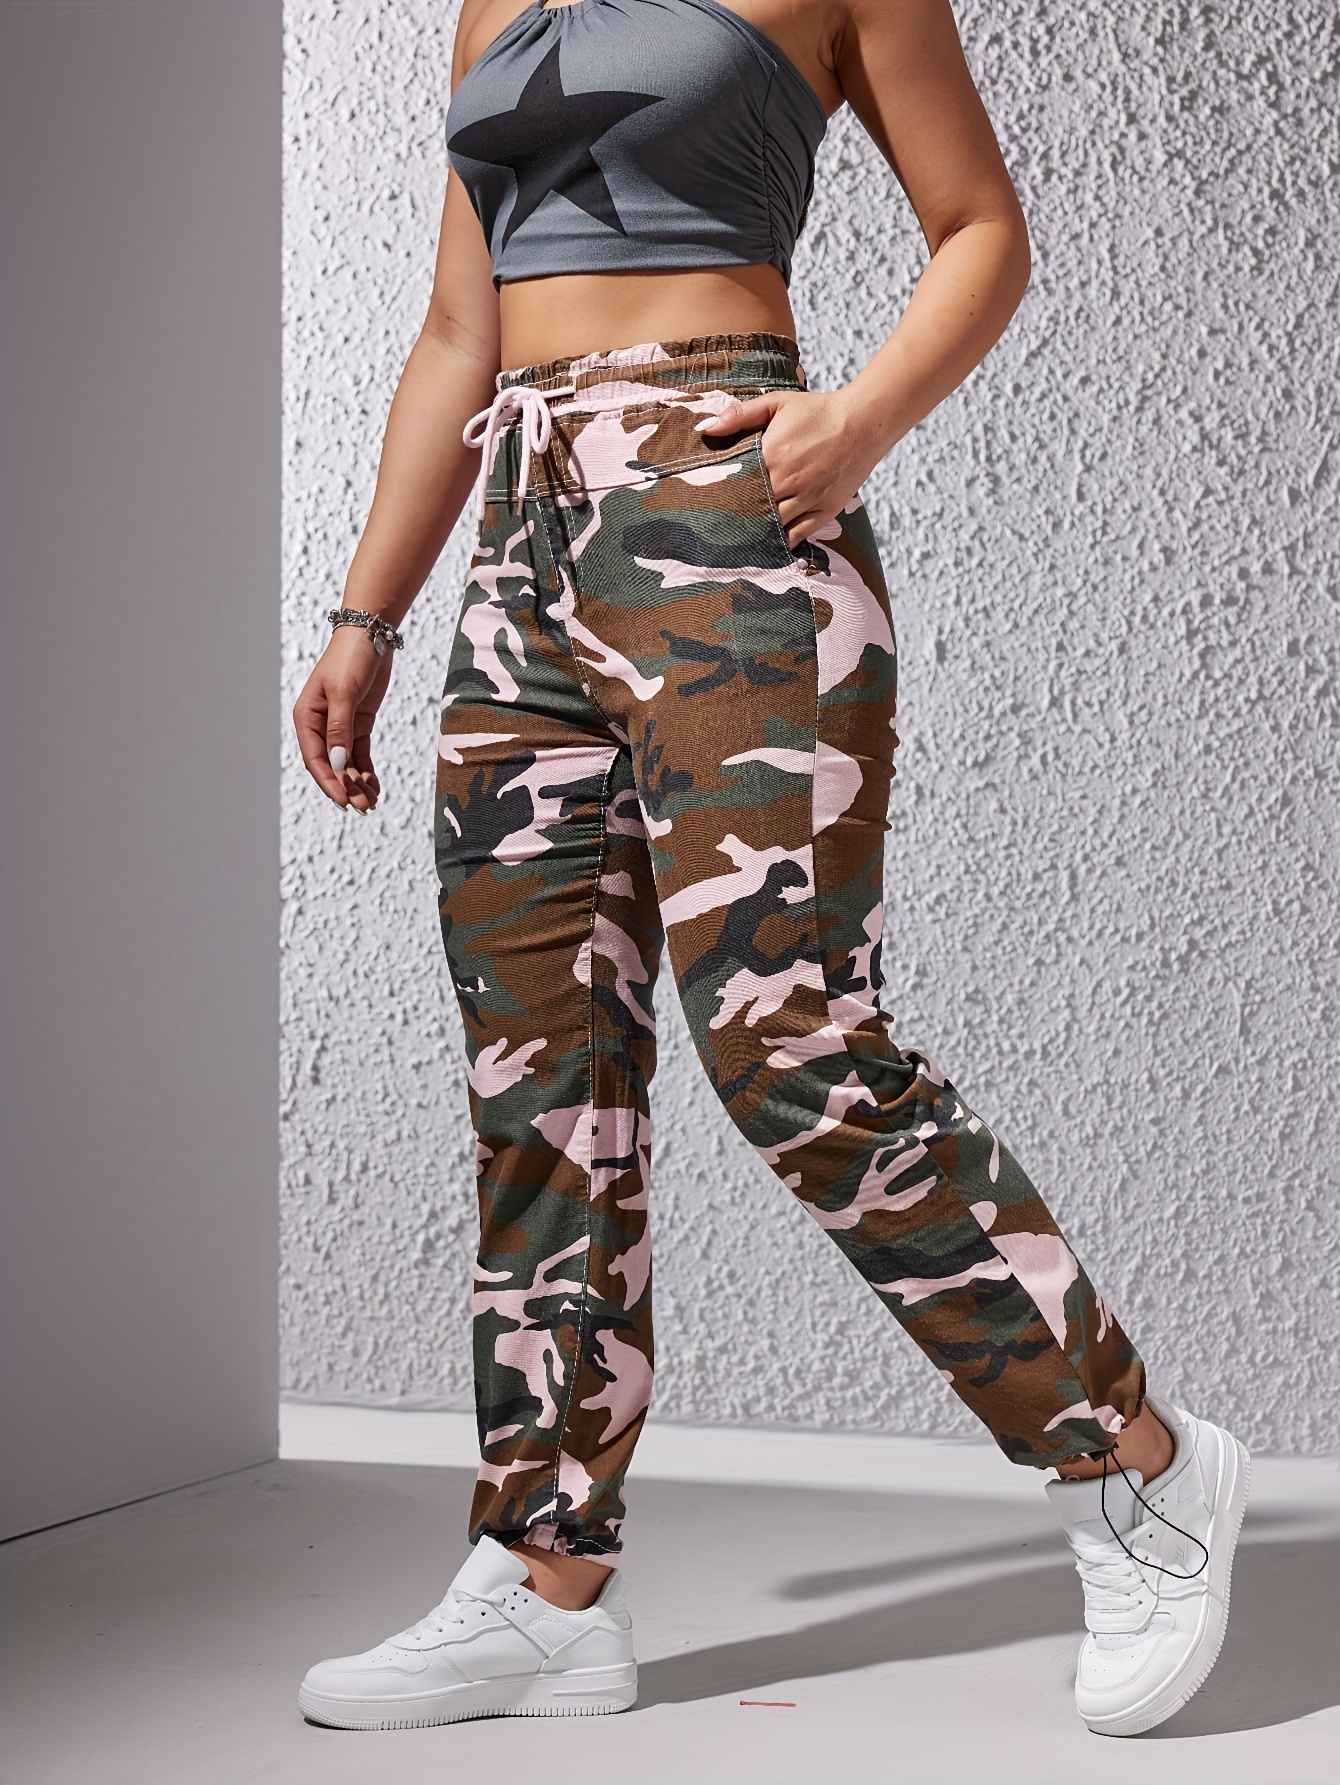  Pants for Women High Waist,Women's Camouflage Jogger Pants with  Random Printed Drawstring and Cuffed Hem Trendy Comfortable Pants  Camouflage, S Dressing Pants for Women Daisy Flowy Shorts : Clothing, Shoes  